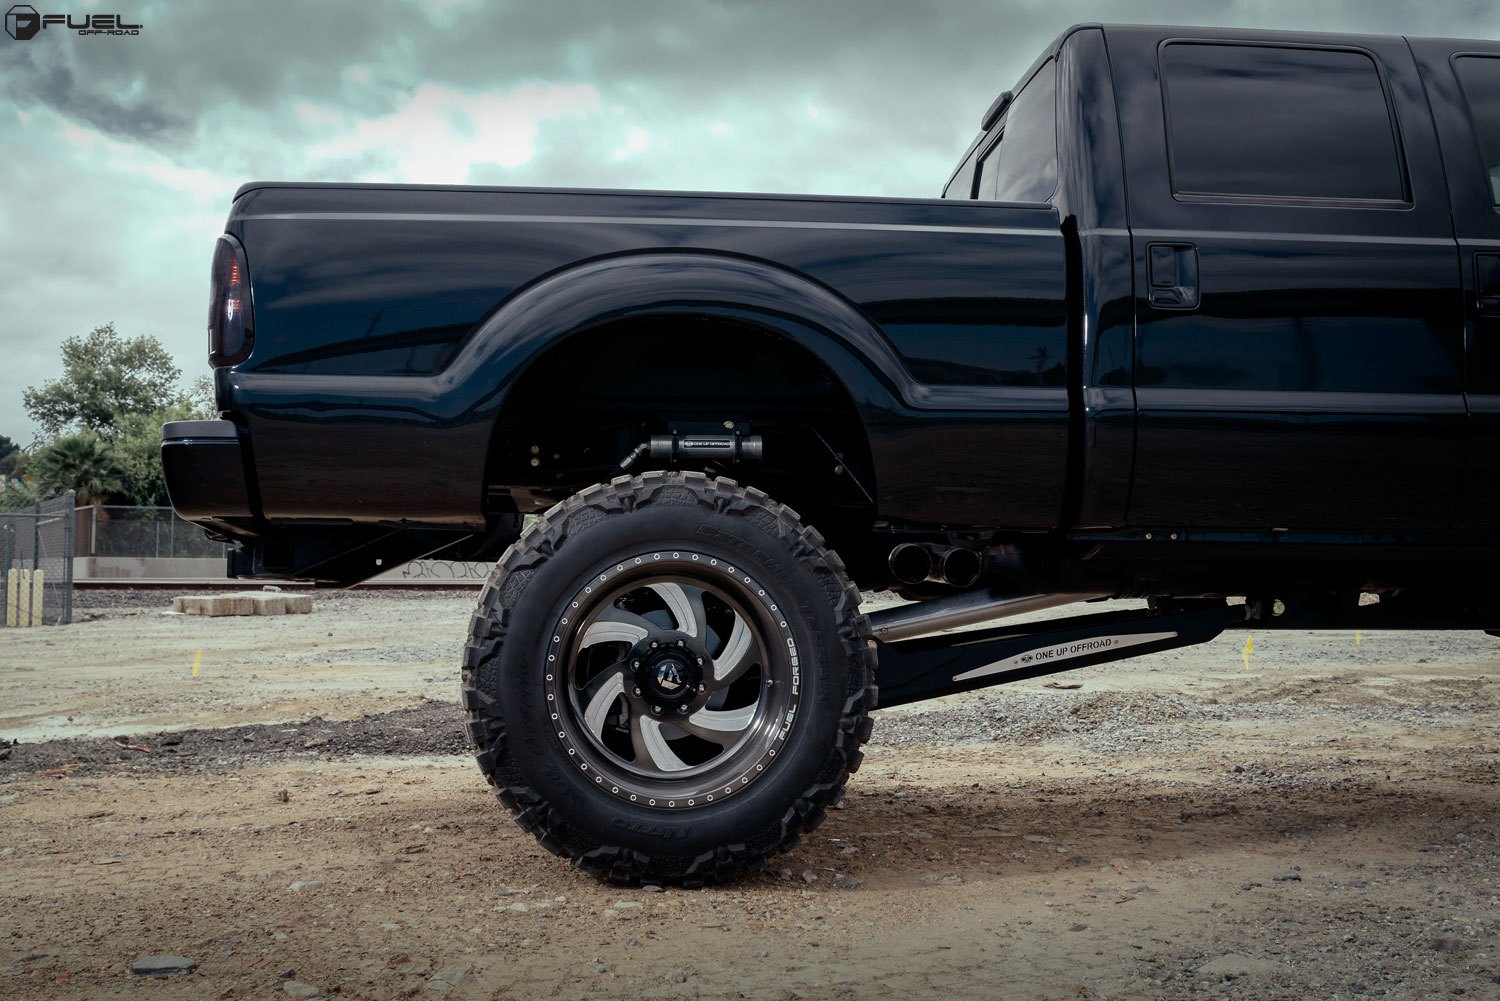 Black Ford F-350 with Candy Black Fuel Offroad Wheels - Photo by Fuel Offroad